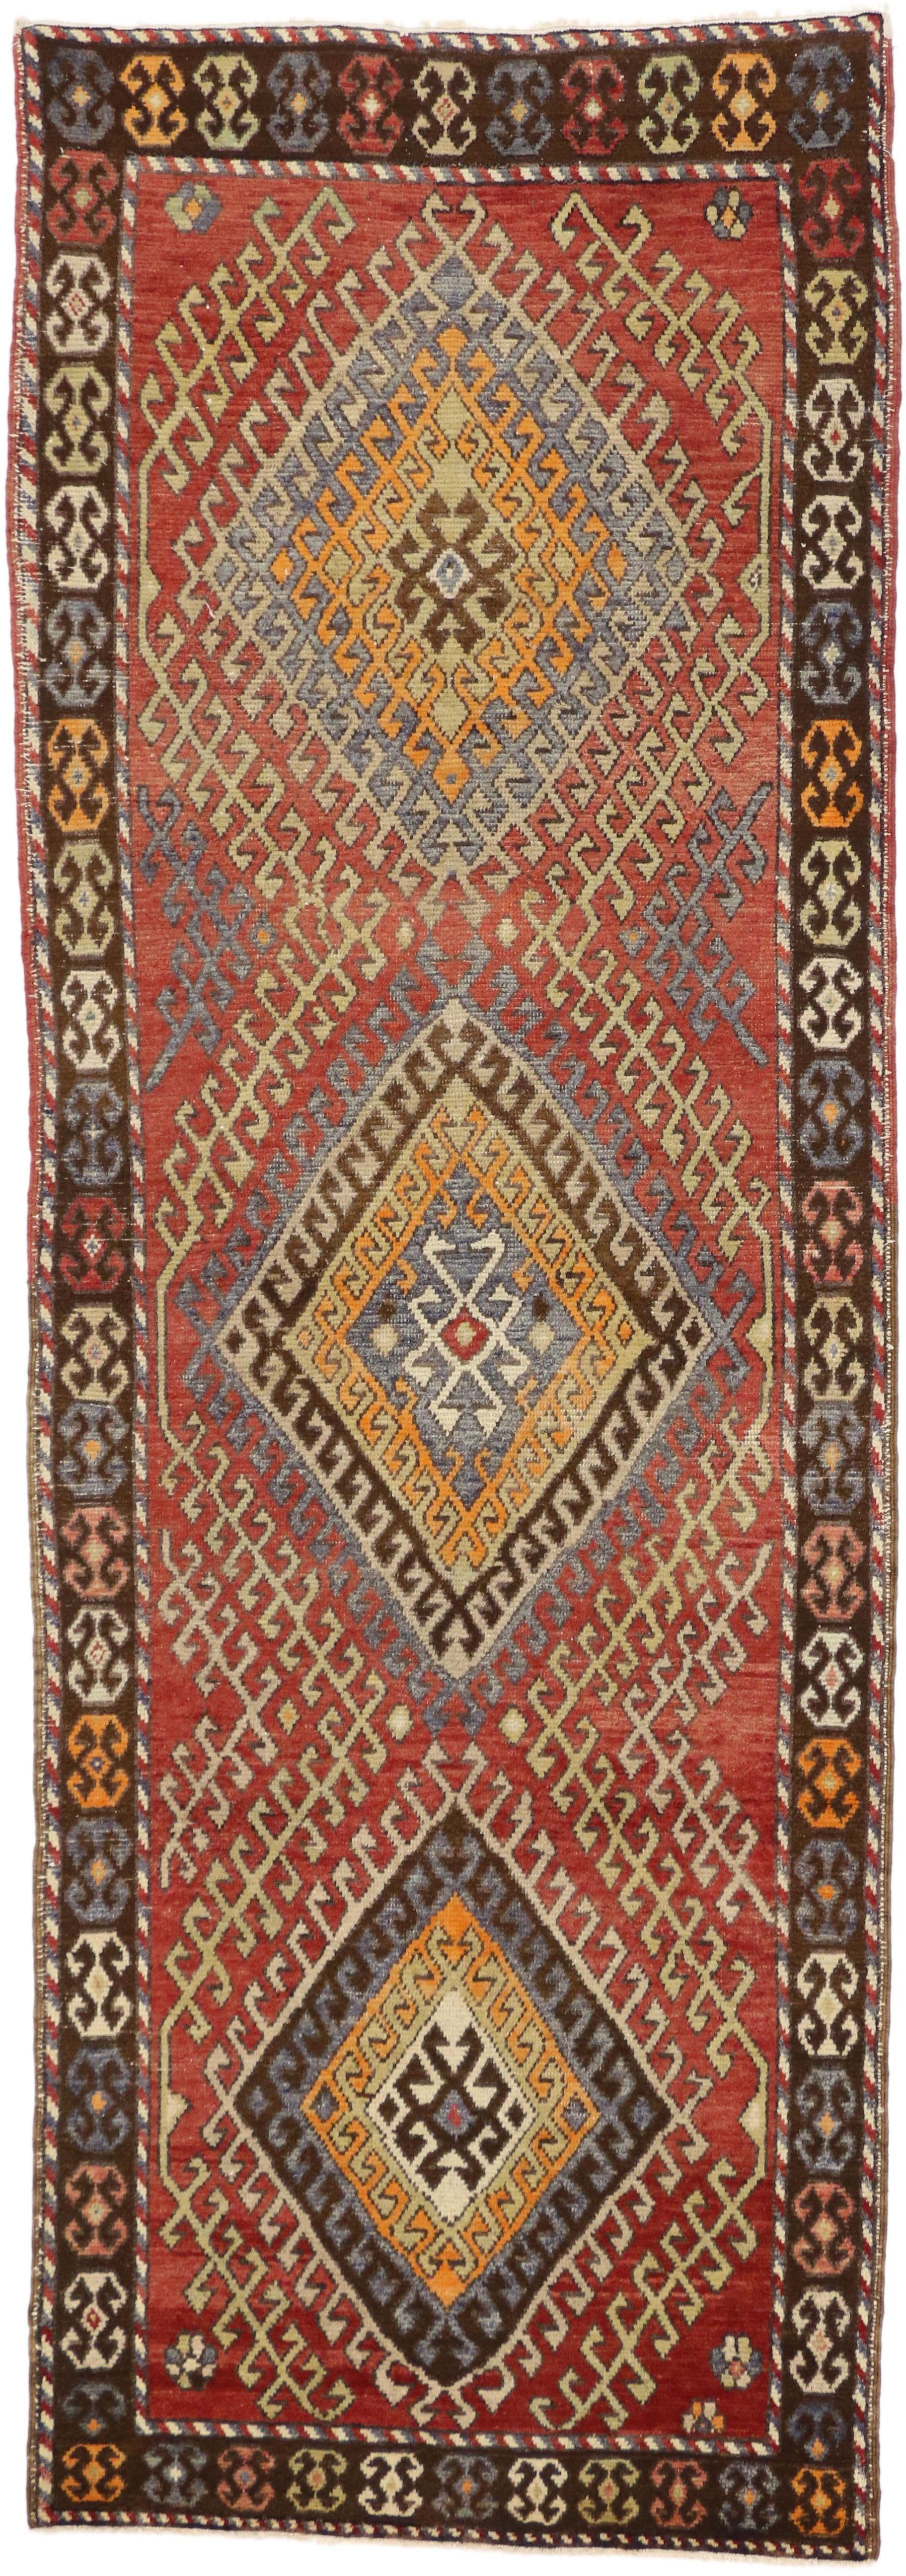 50340 Rustic Style Vintage Turkish Oushak Runner, Tribal Hallway Runner. This hand-knotted wool vintage Turkish Oushak runner features three stacked lozenge medallions with latch hook edges and steep latch hooked ziggurats protruding towards the